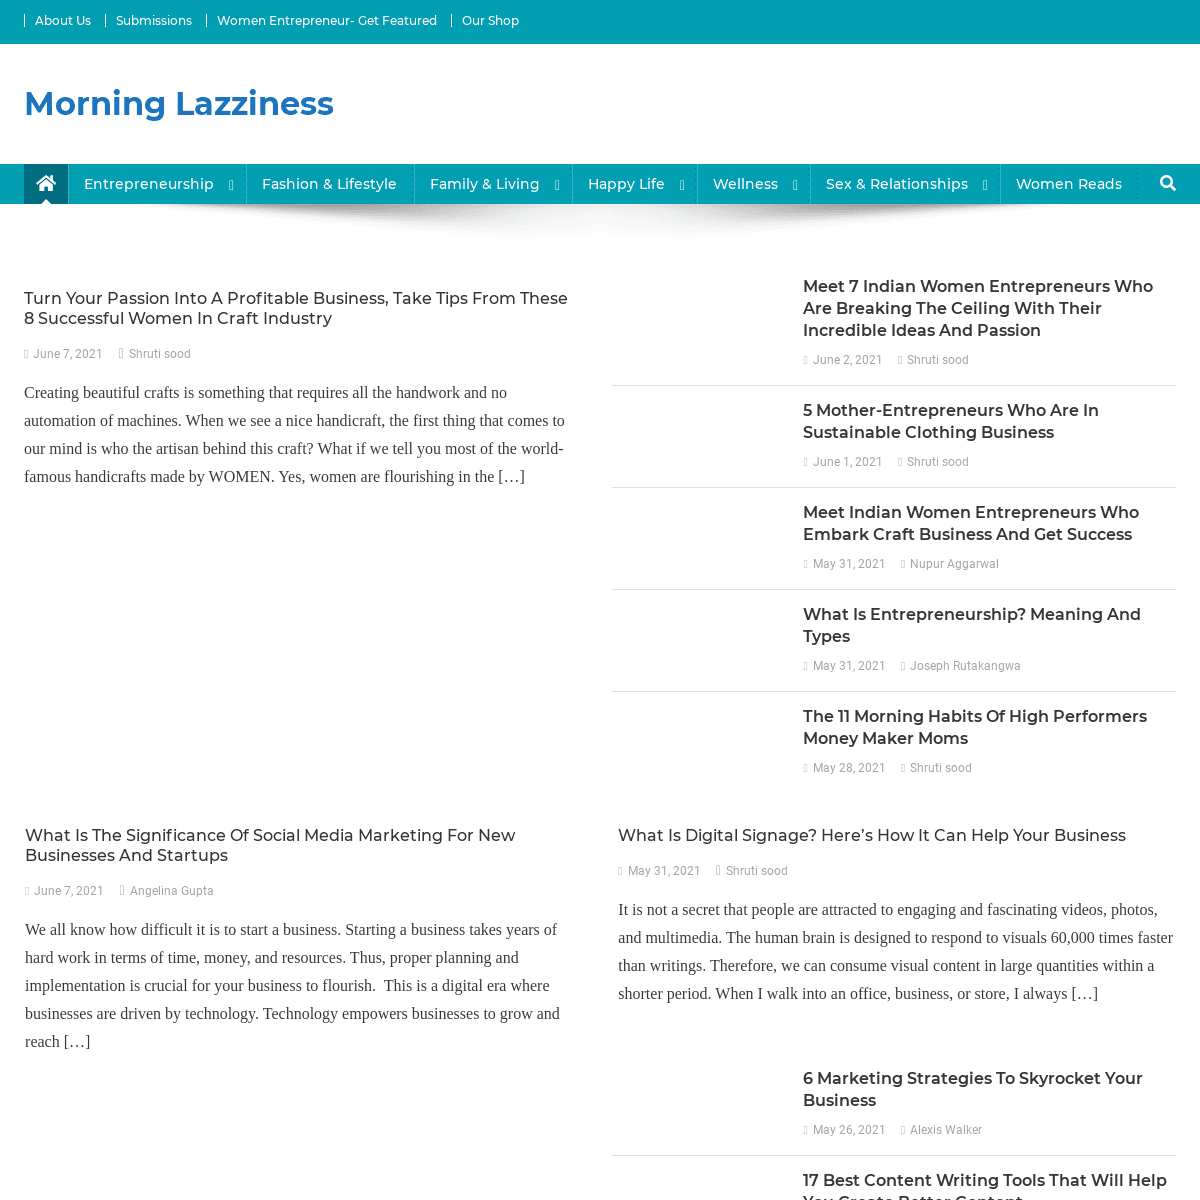 A complete backup of https://morninglazziness.com